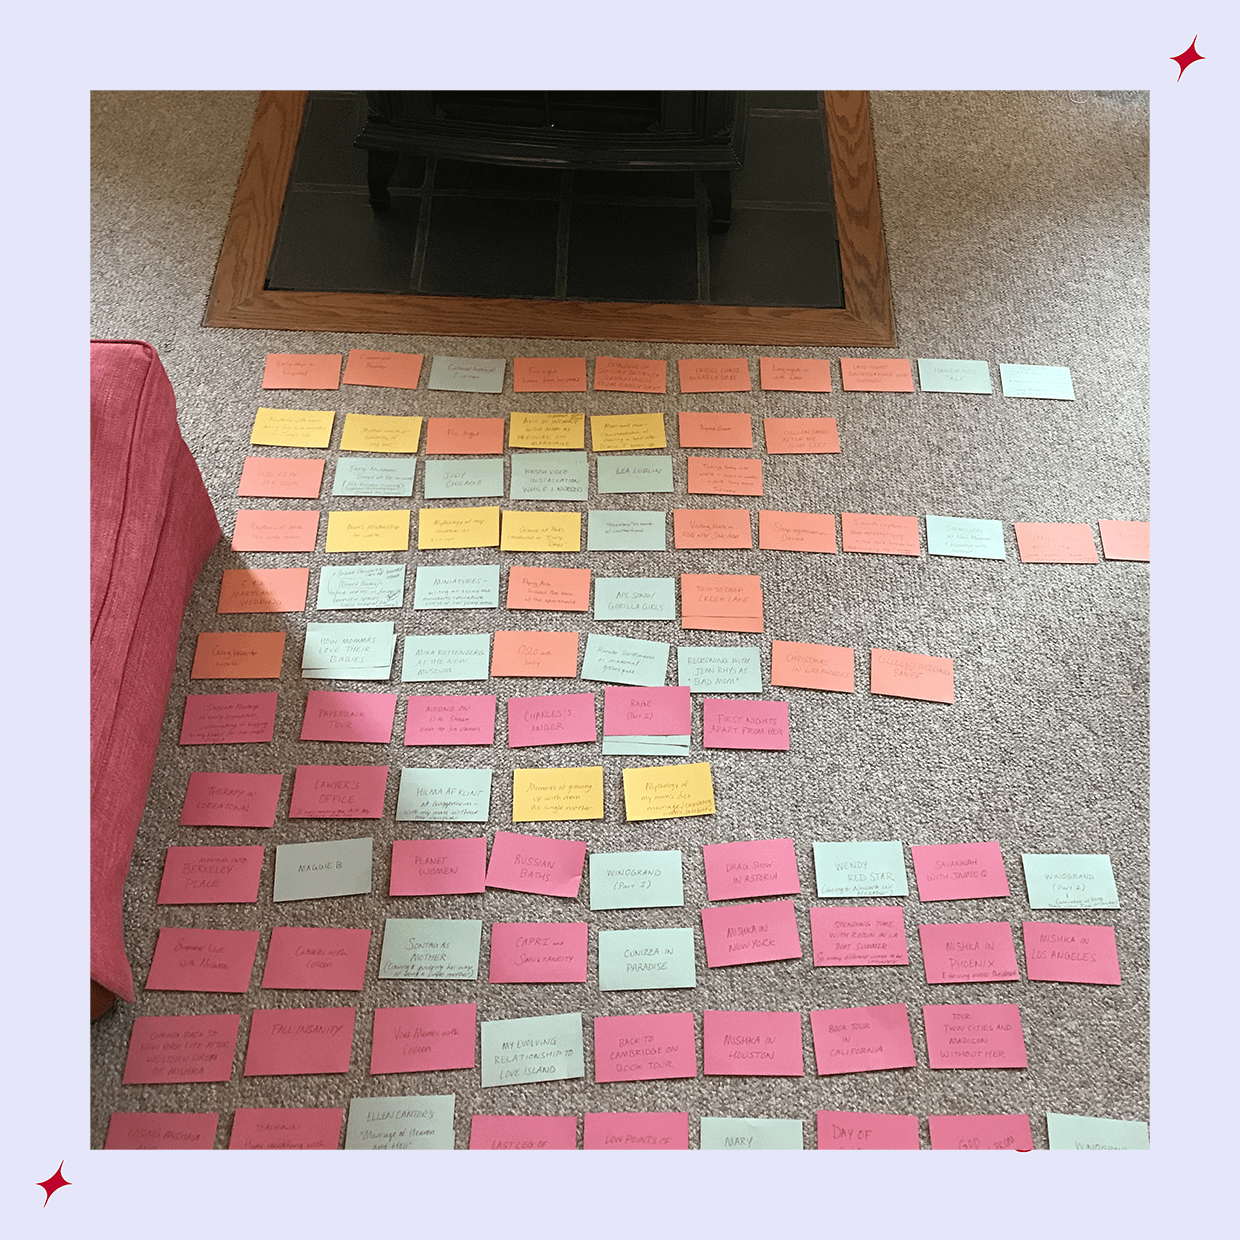 The author’s aforementioned multicolored index cards, laid out in orderly lines on a carpeted floor.